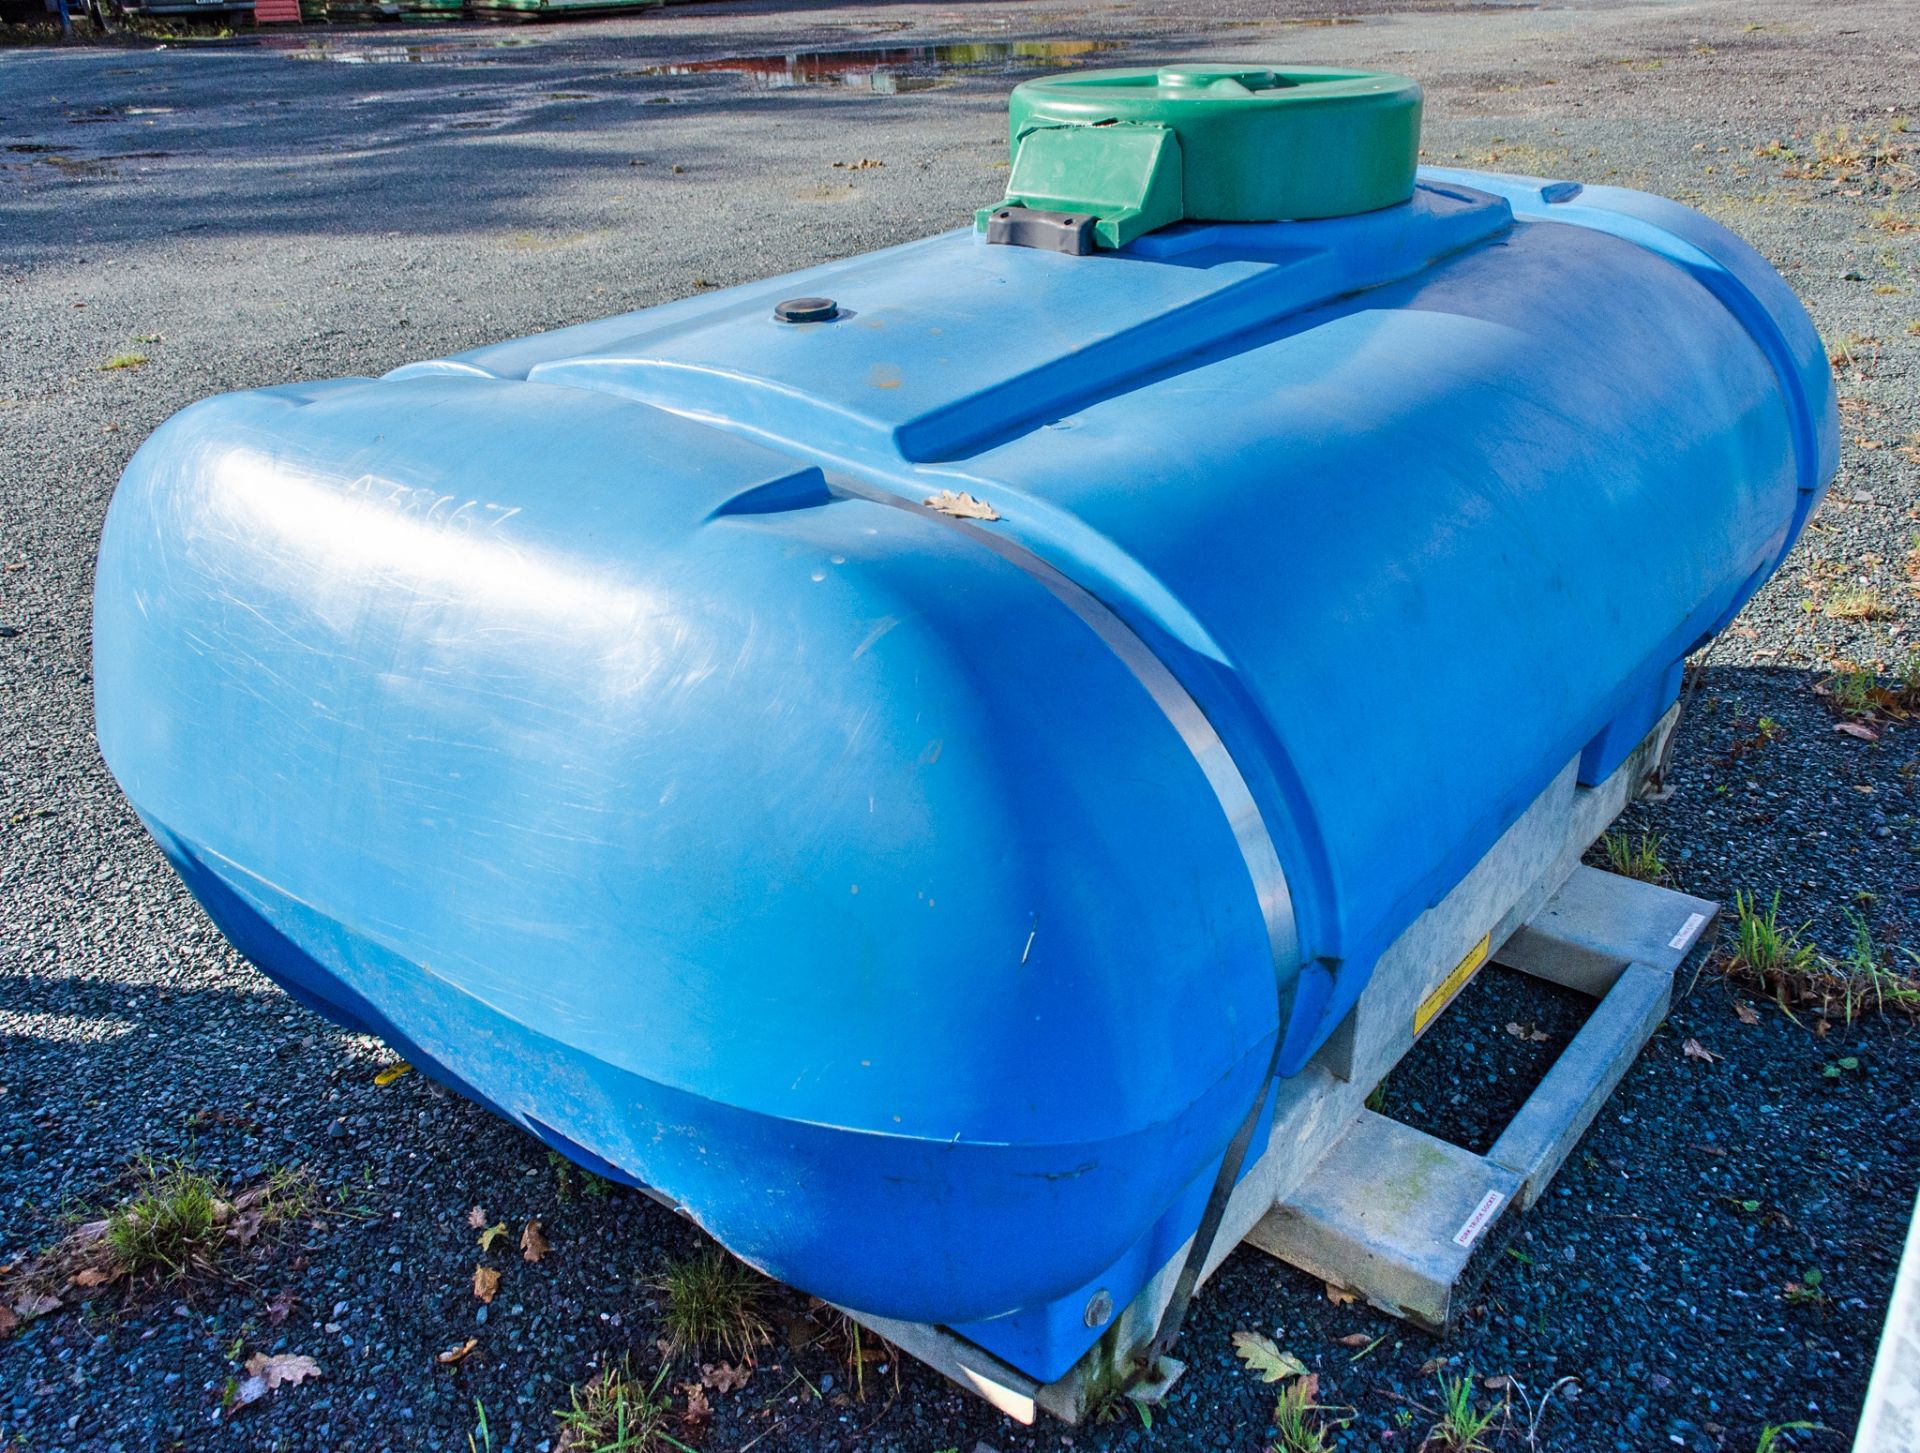 Trailer Engineering 1100 litre skid mounted water bowser A758667 - Image 2 of 2